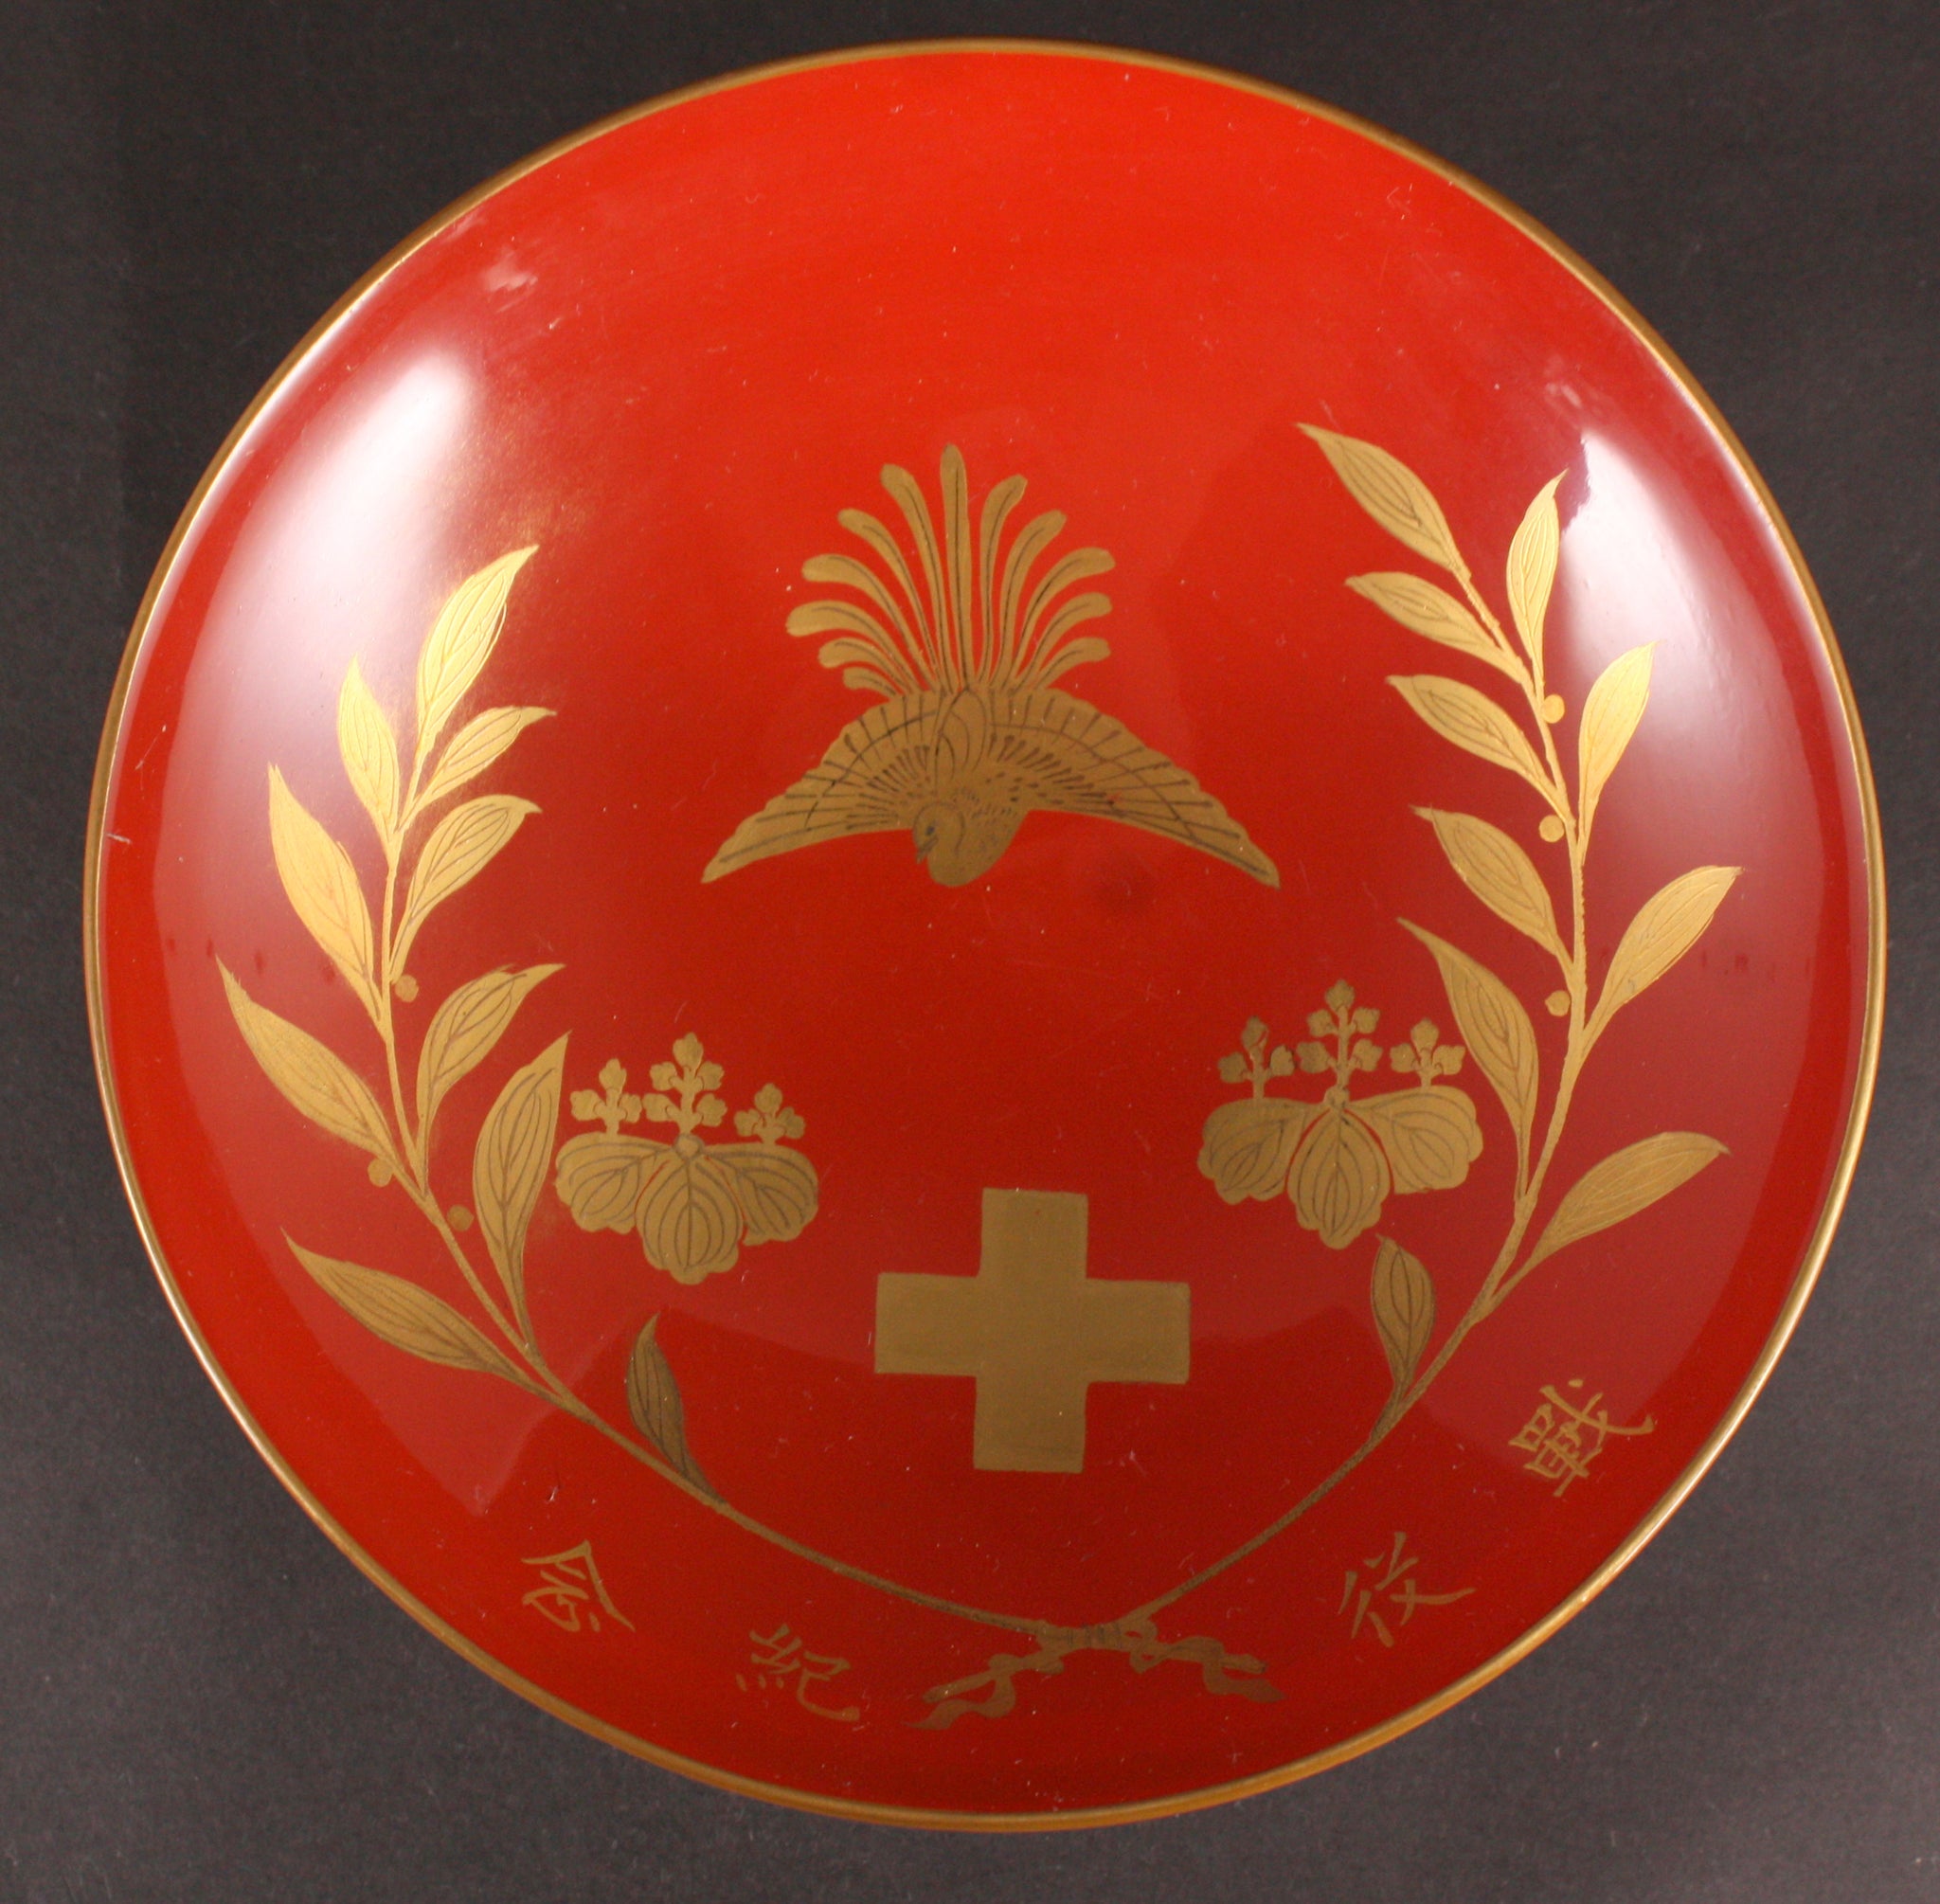 Russo Japanese War Victory Red Cross Association Medic Lacquer Army Sake Cups